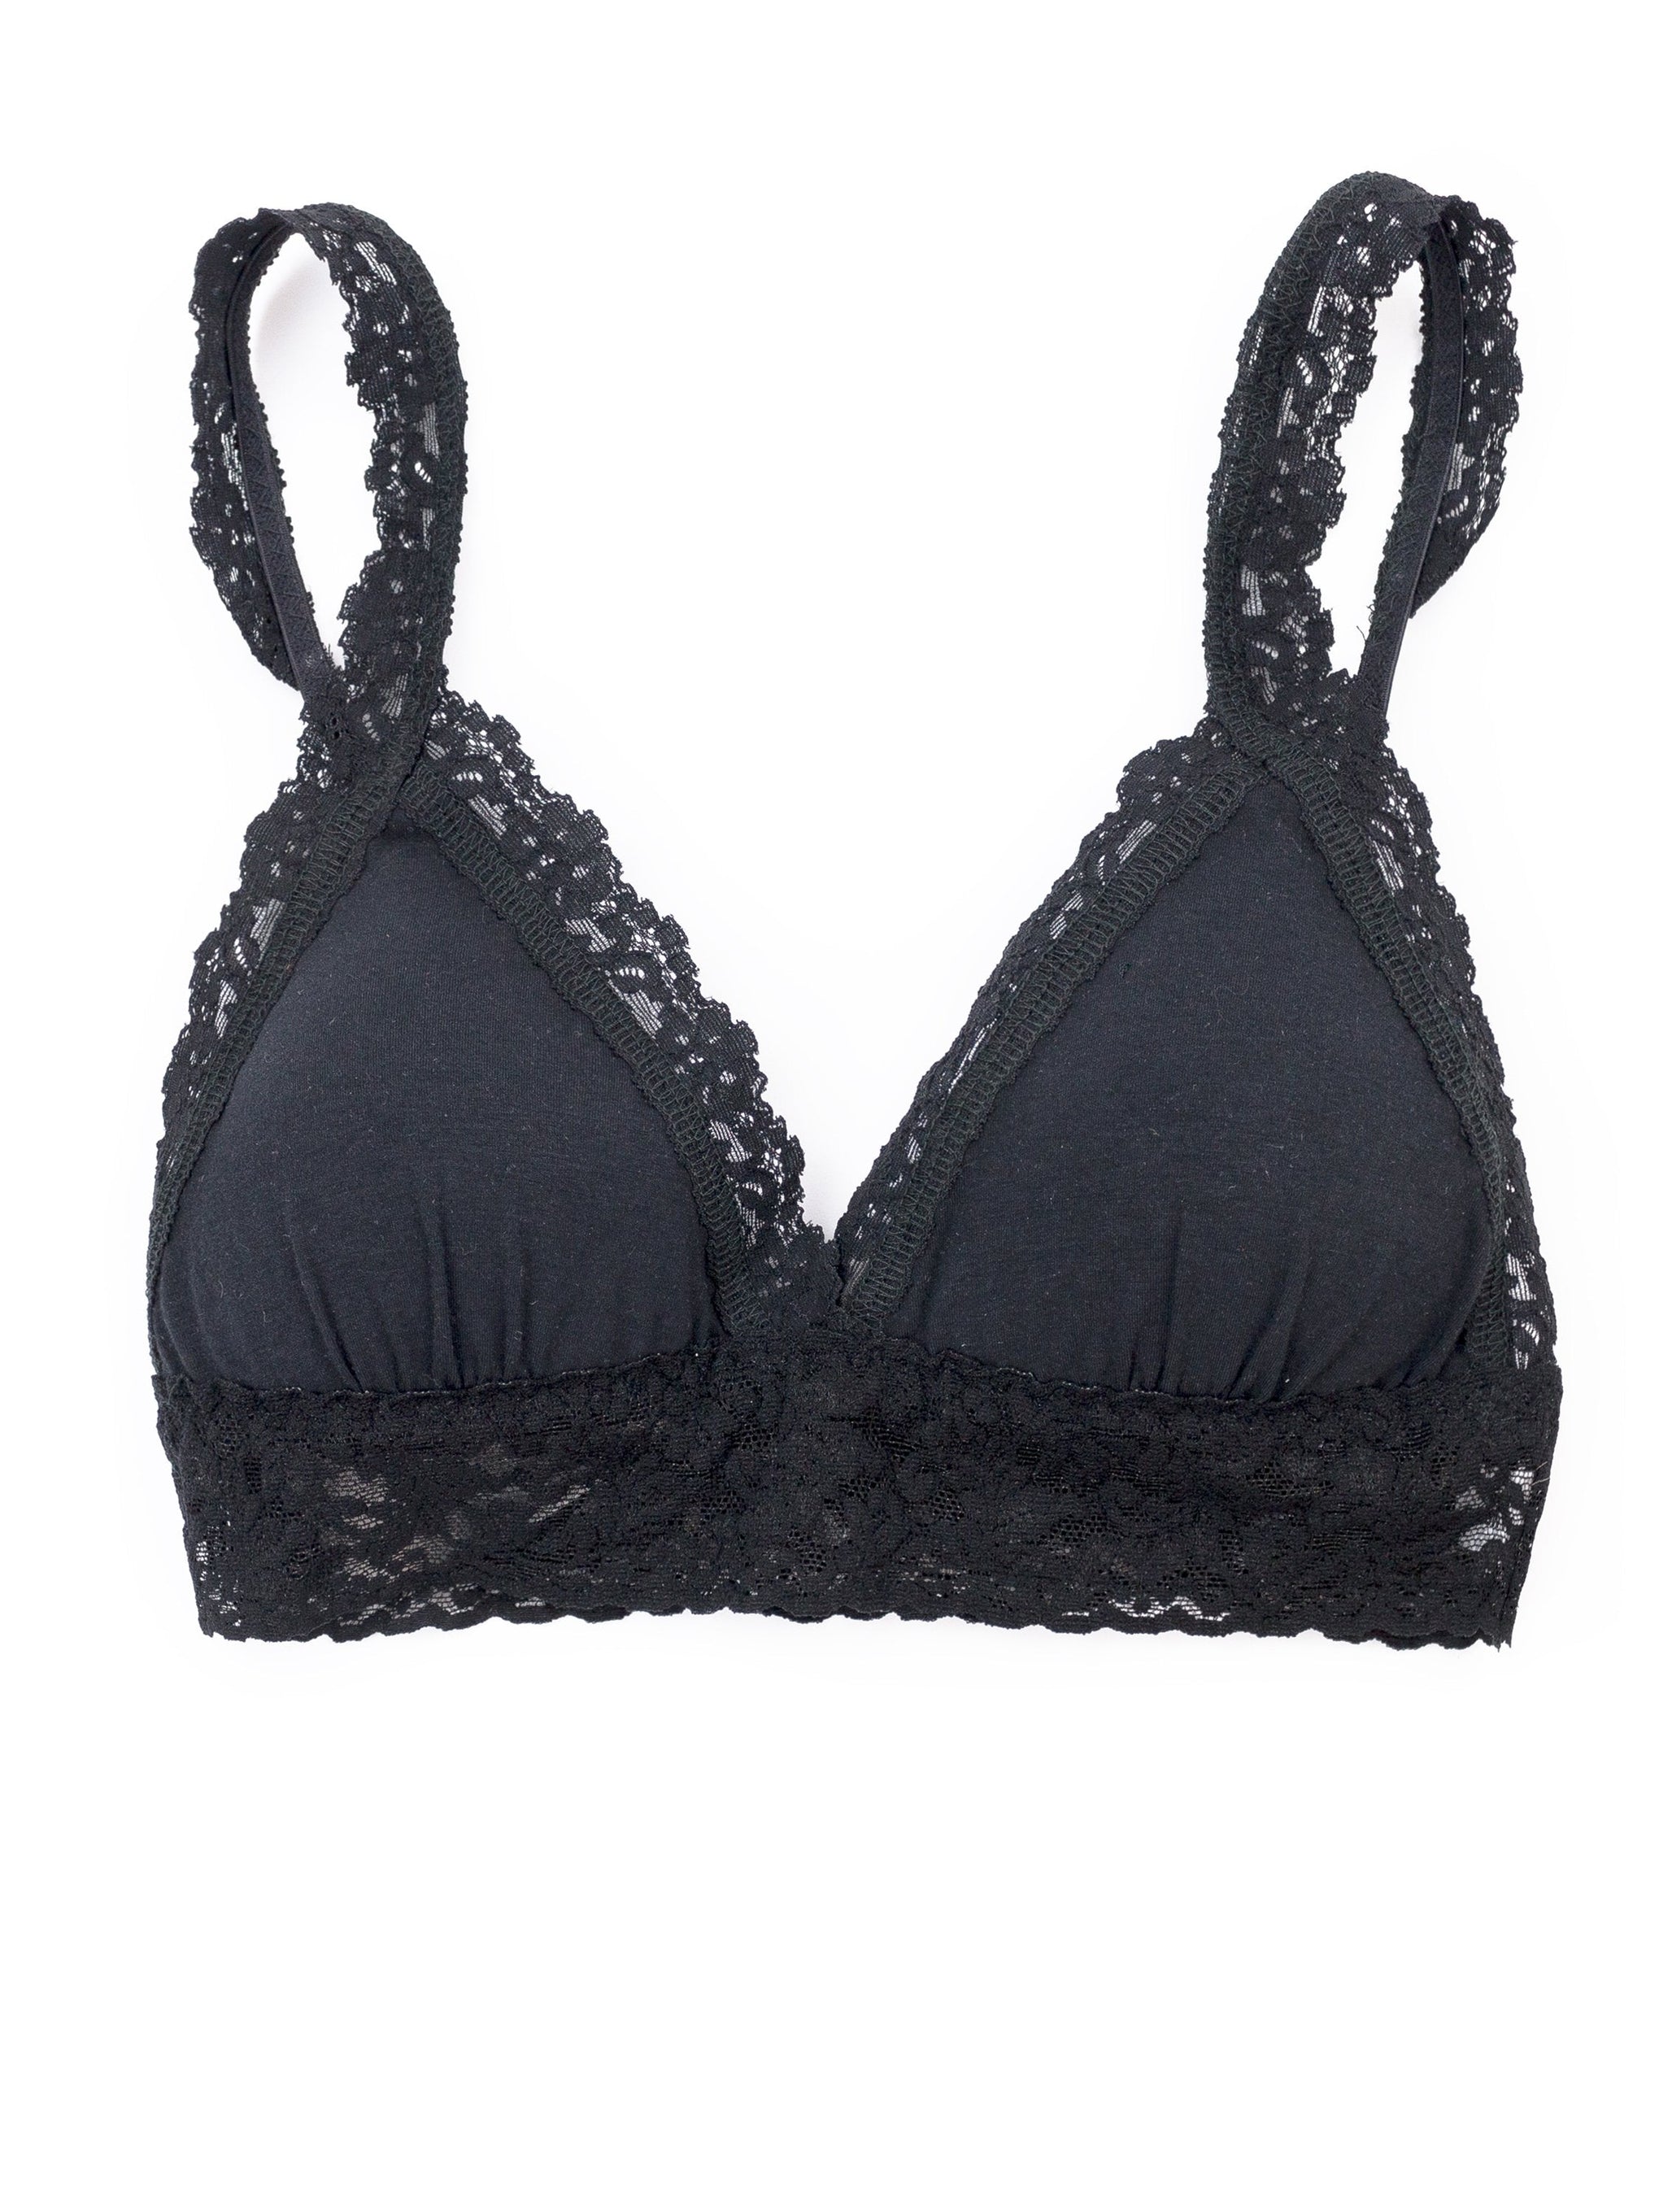 Black Sexy Sleep Lingerie: Buy Online at Best Price in Egypt